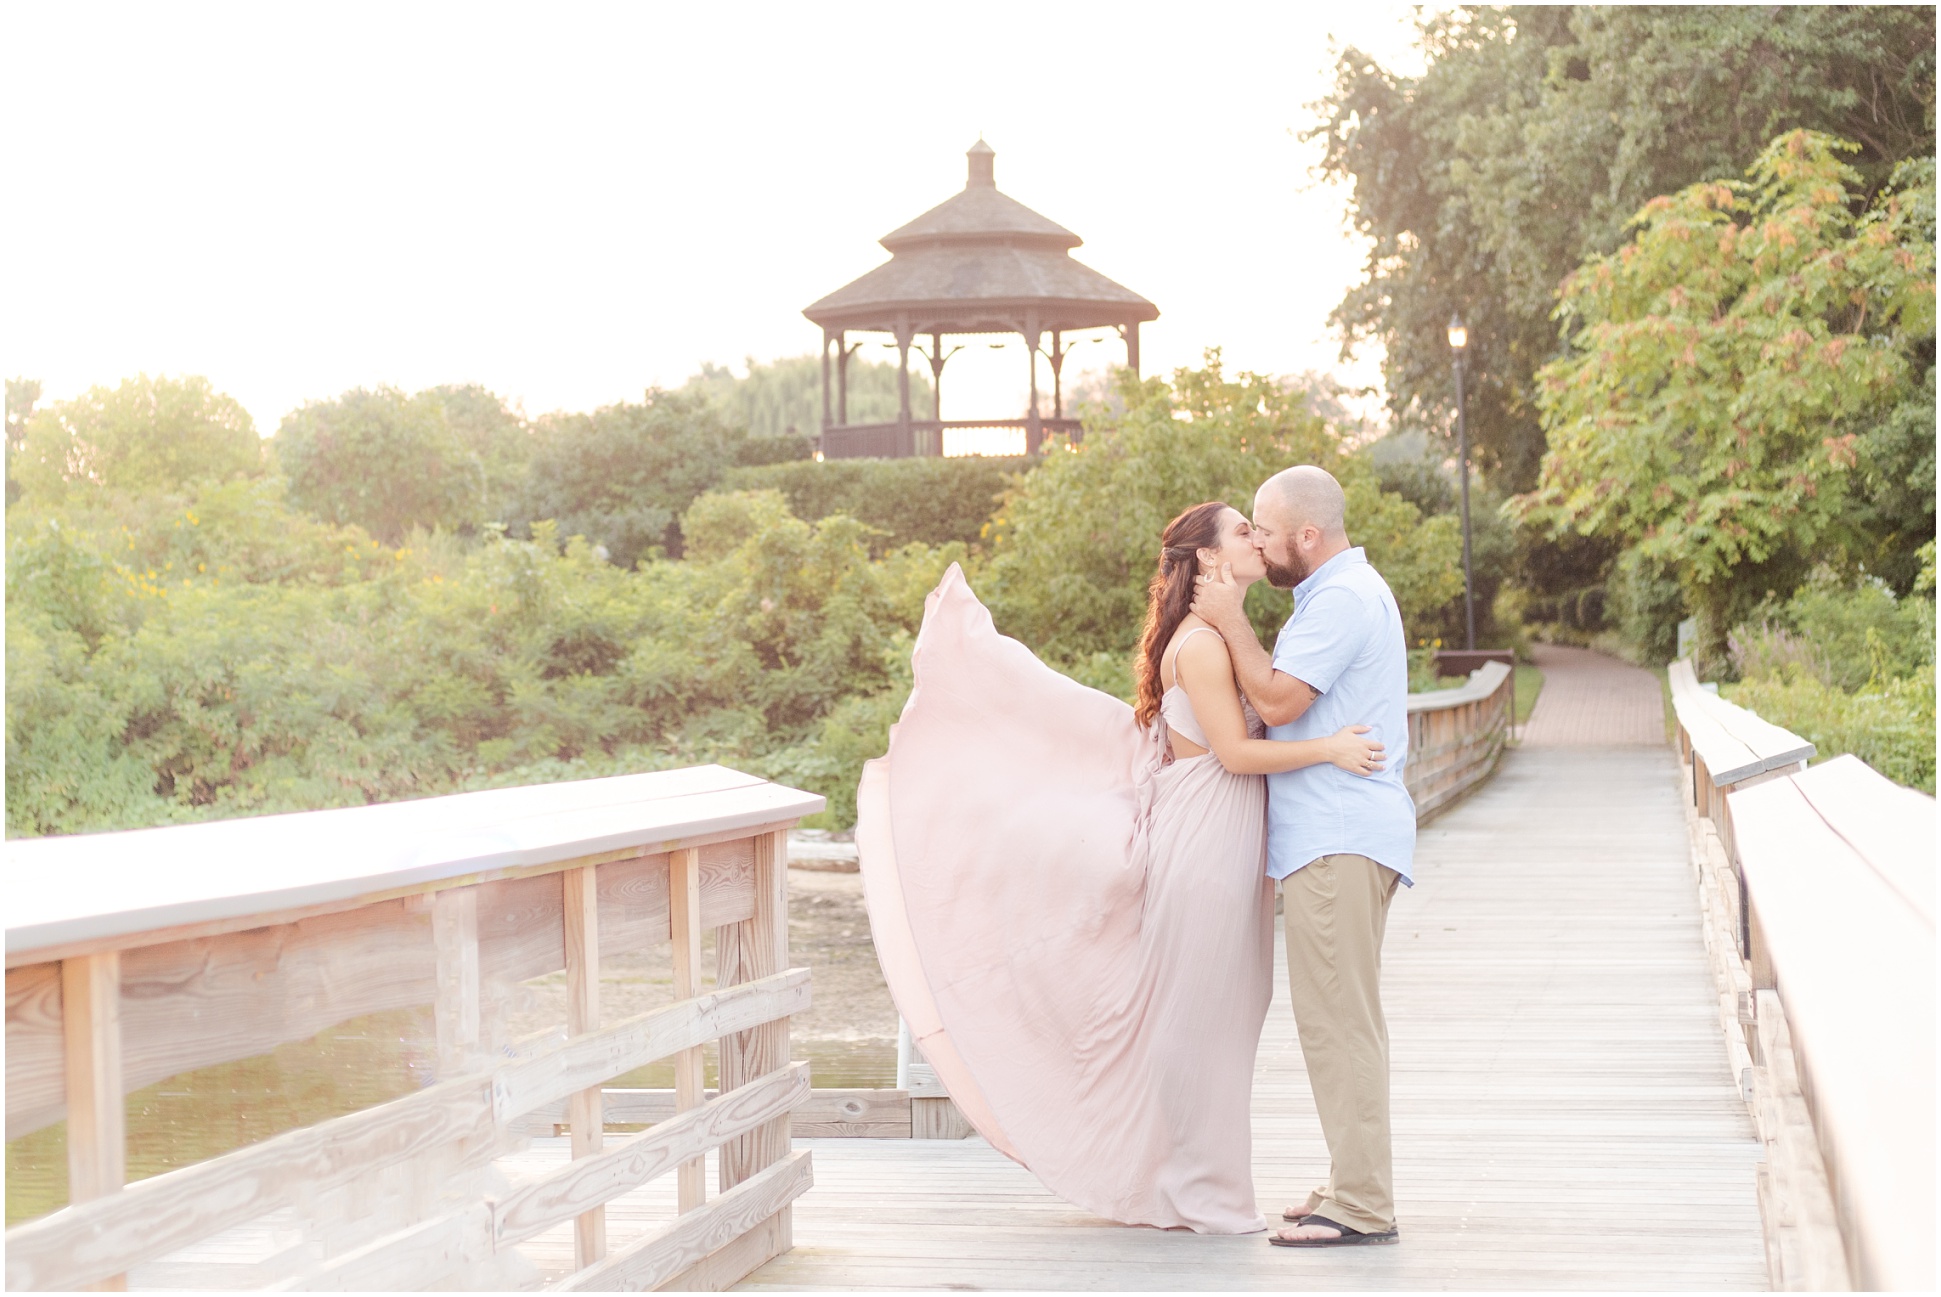 Blush dress blowing in the wind as bride and groom kiss during their engagement session at Swan Harbor Farm